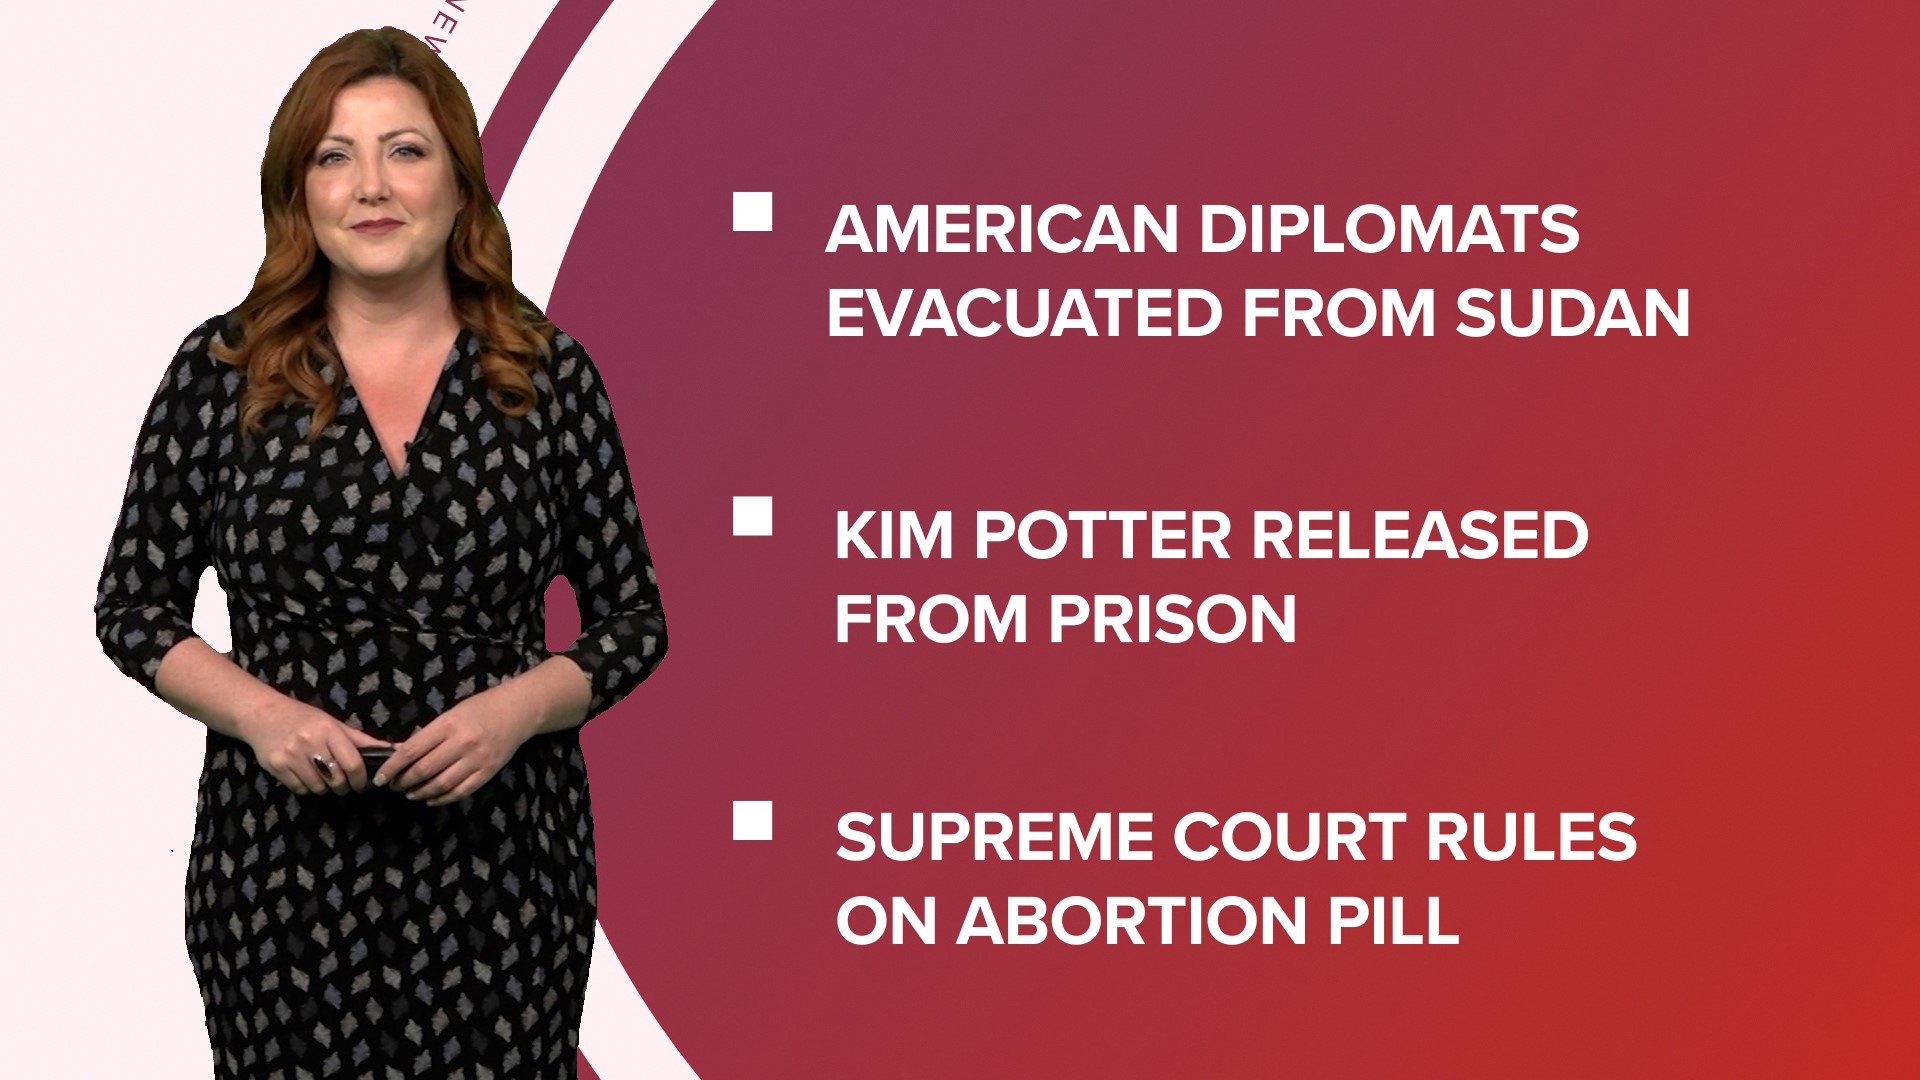 A look at what is happening in the news from US Embassy officials evacuated from Sudan to abortion pill access remains and gymnast Simone Biles gets married.